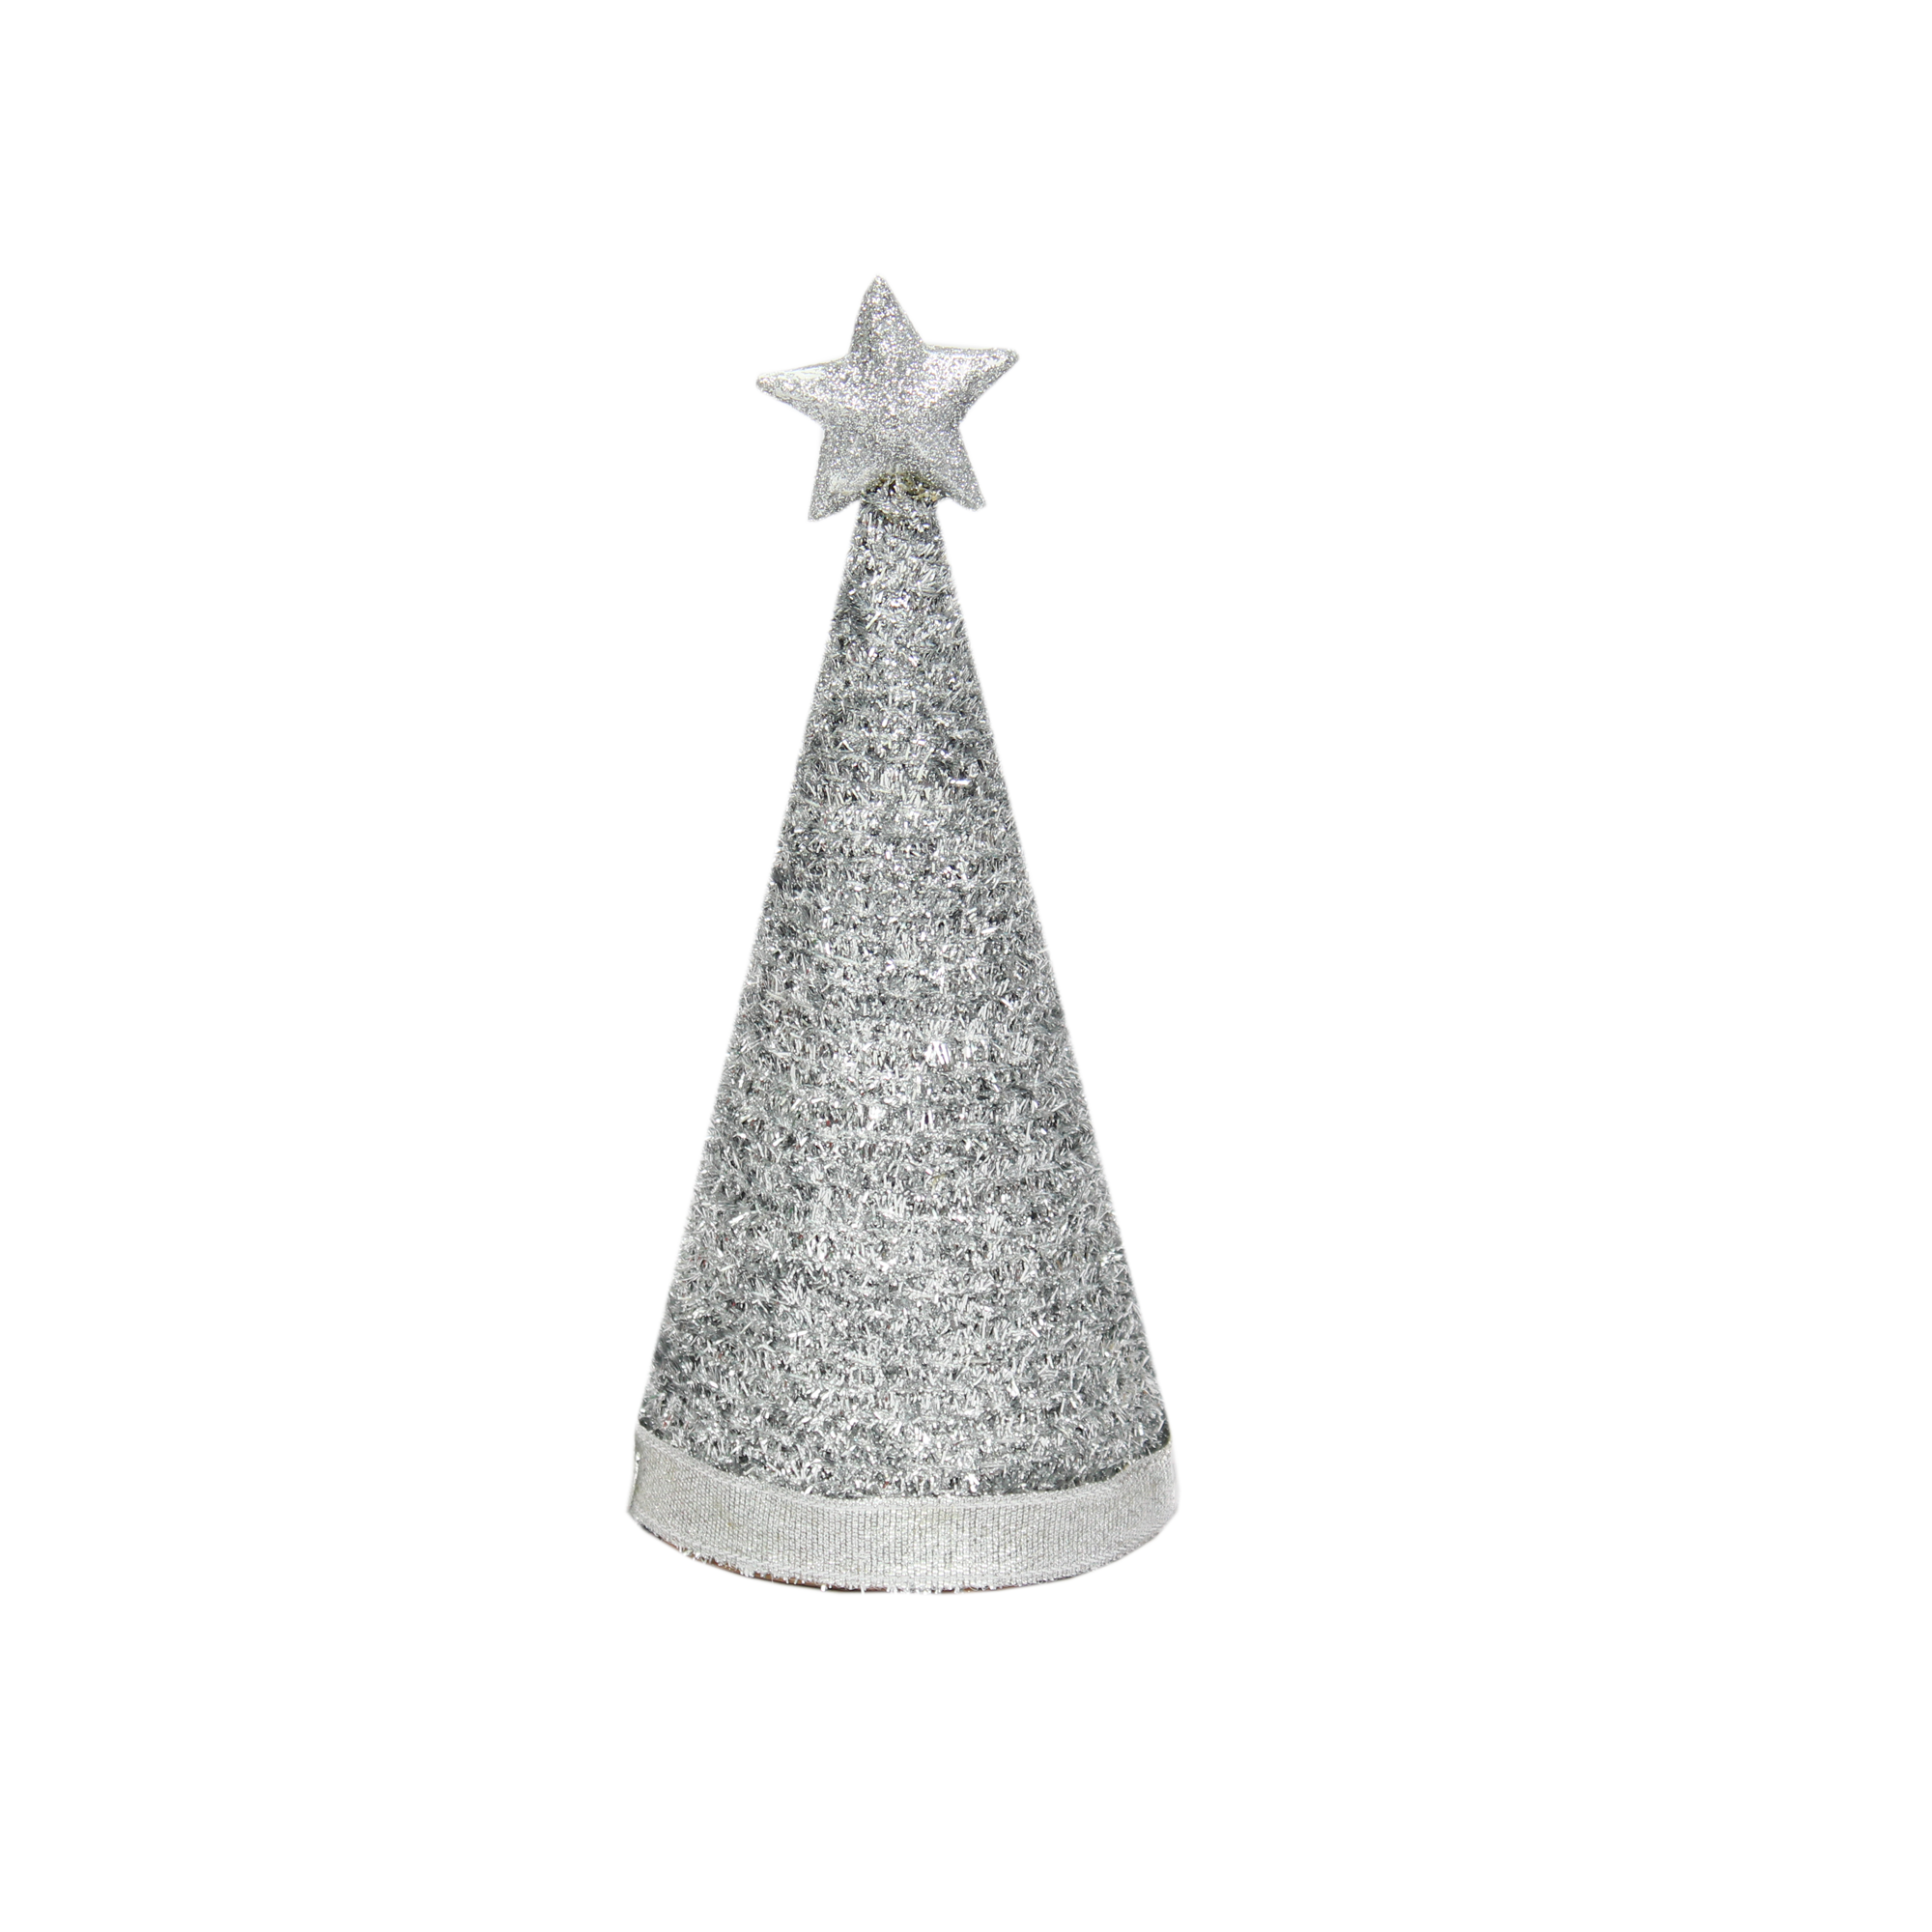 Handmade Conical Christmas Tinsel Tree with Sequins and Star - Height 8 X Width3inch, Silver, 1pc